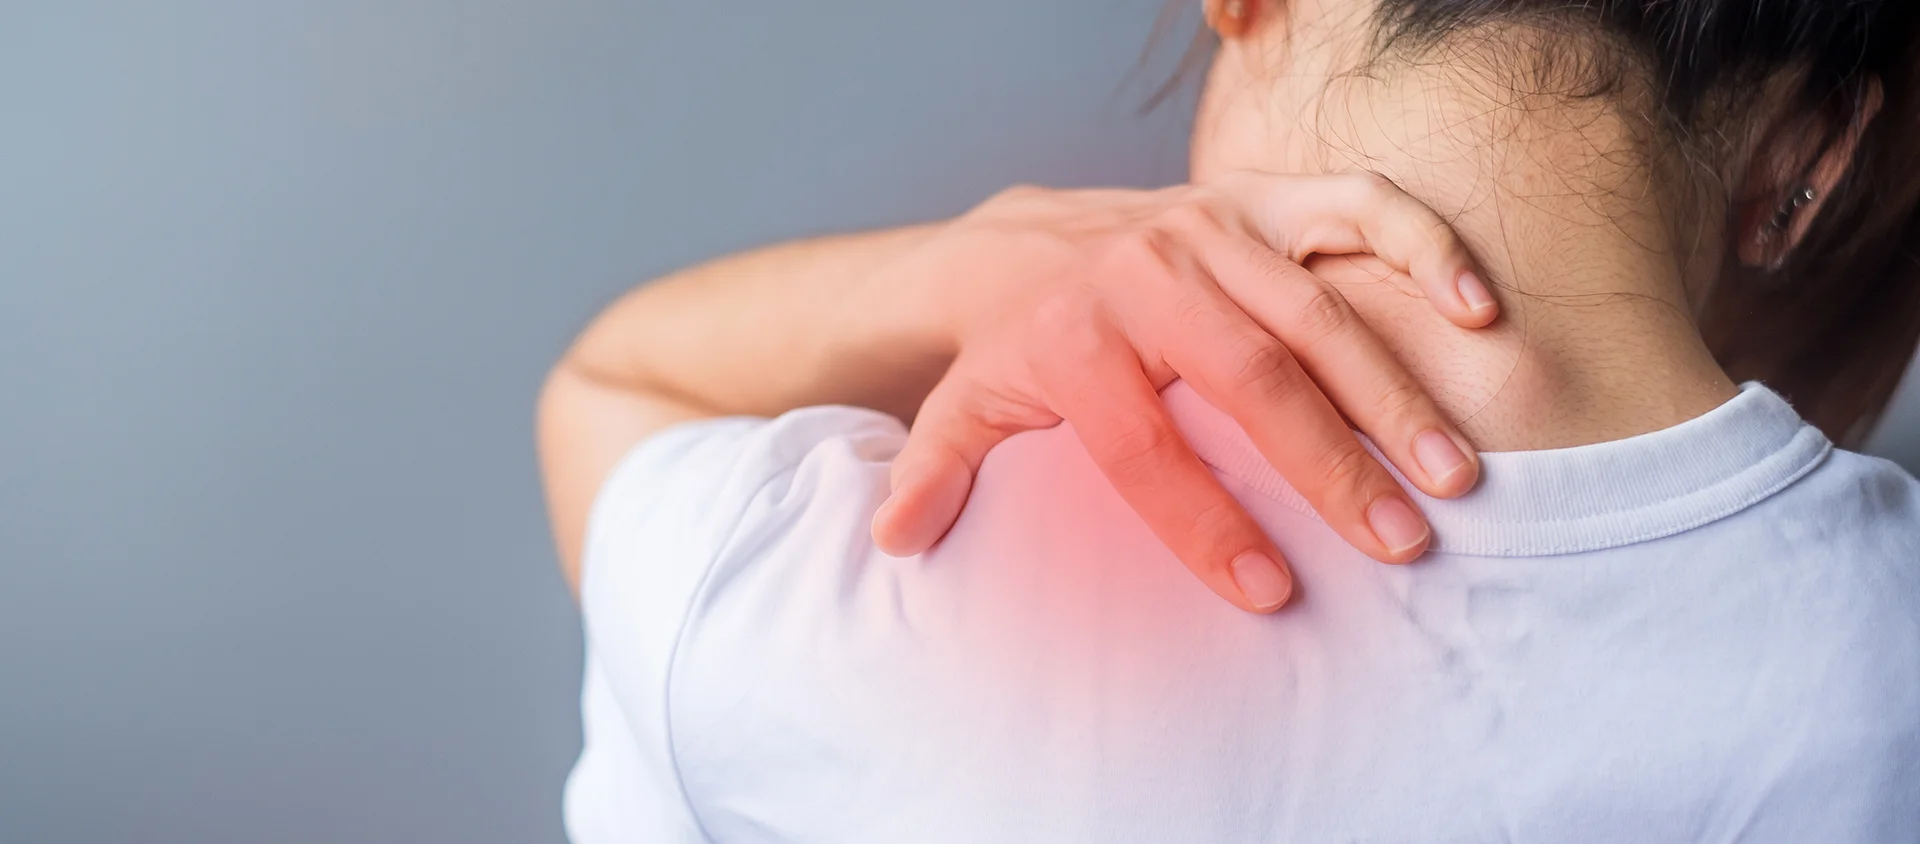 woman with neck and shoulder pain